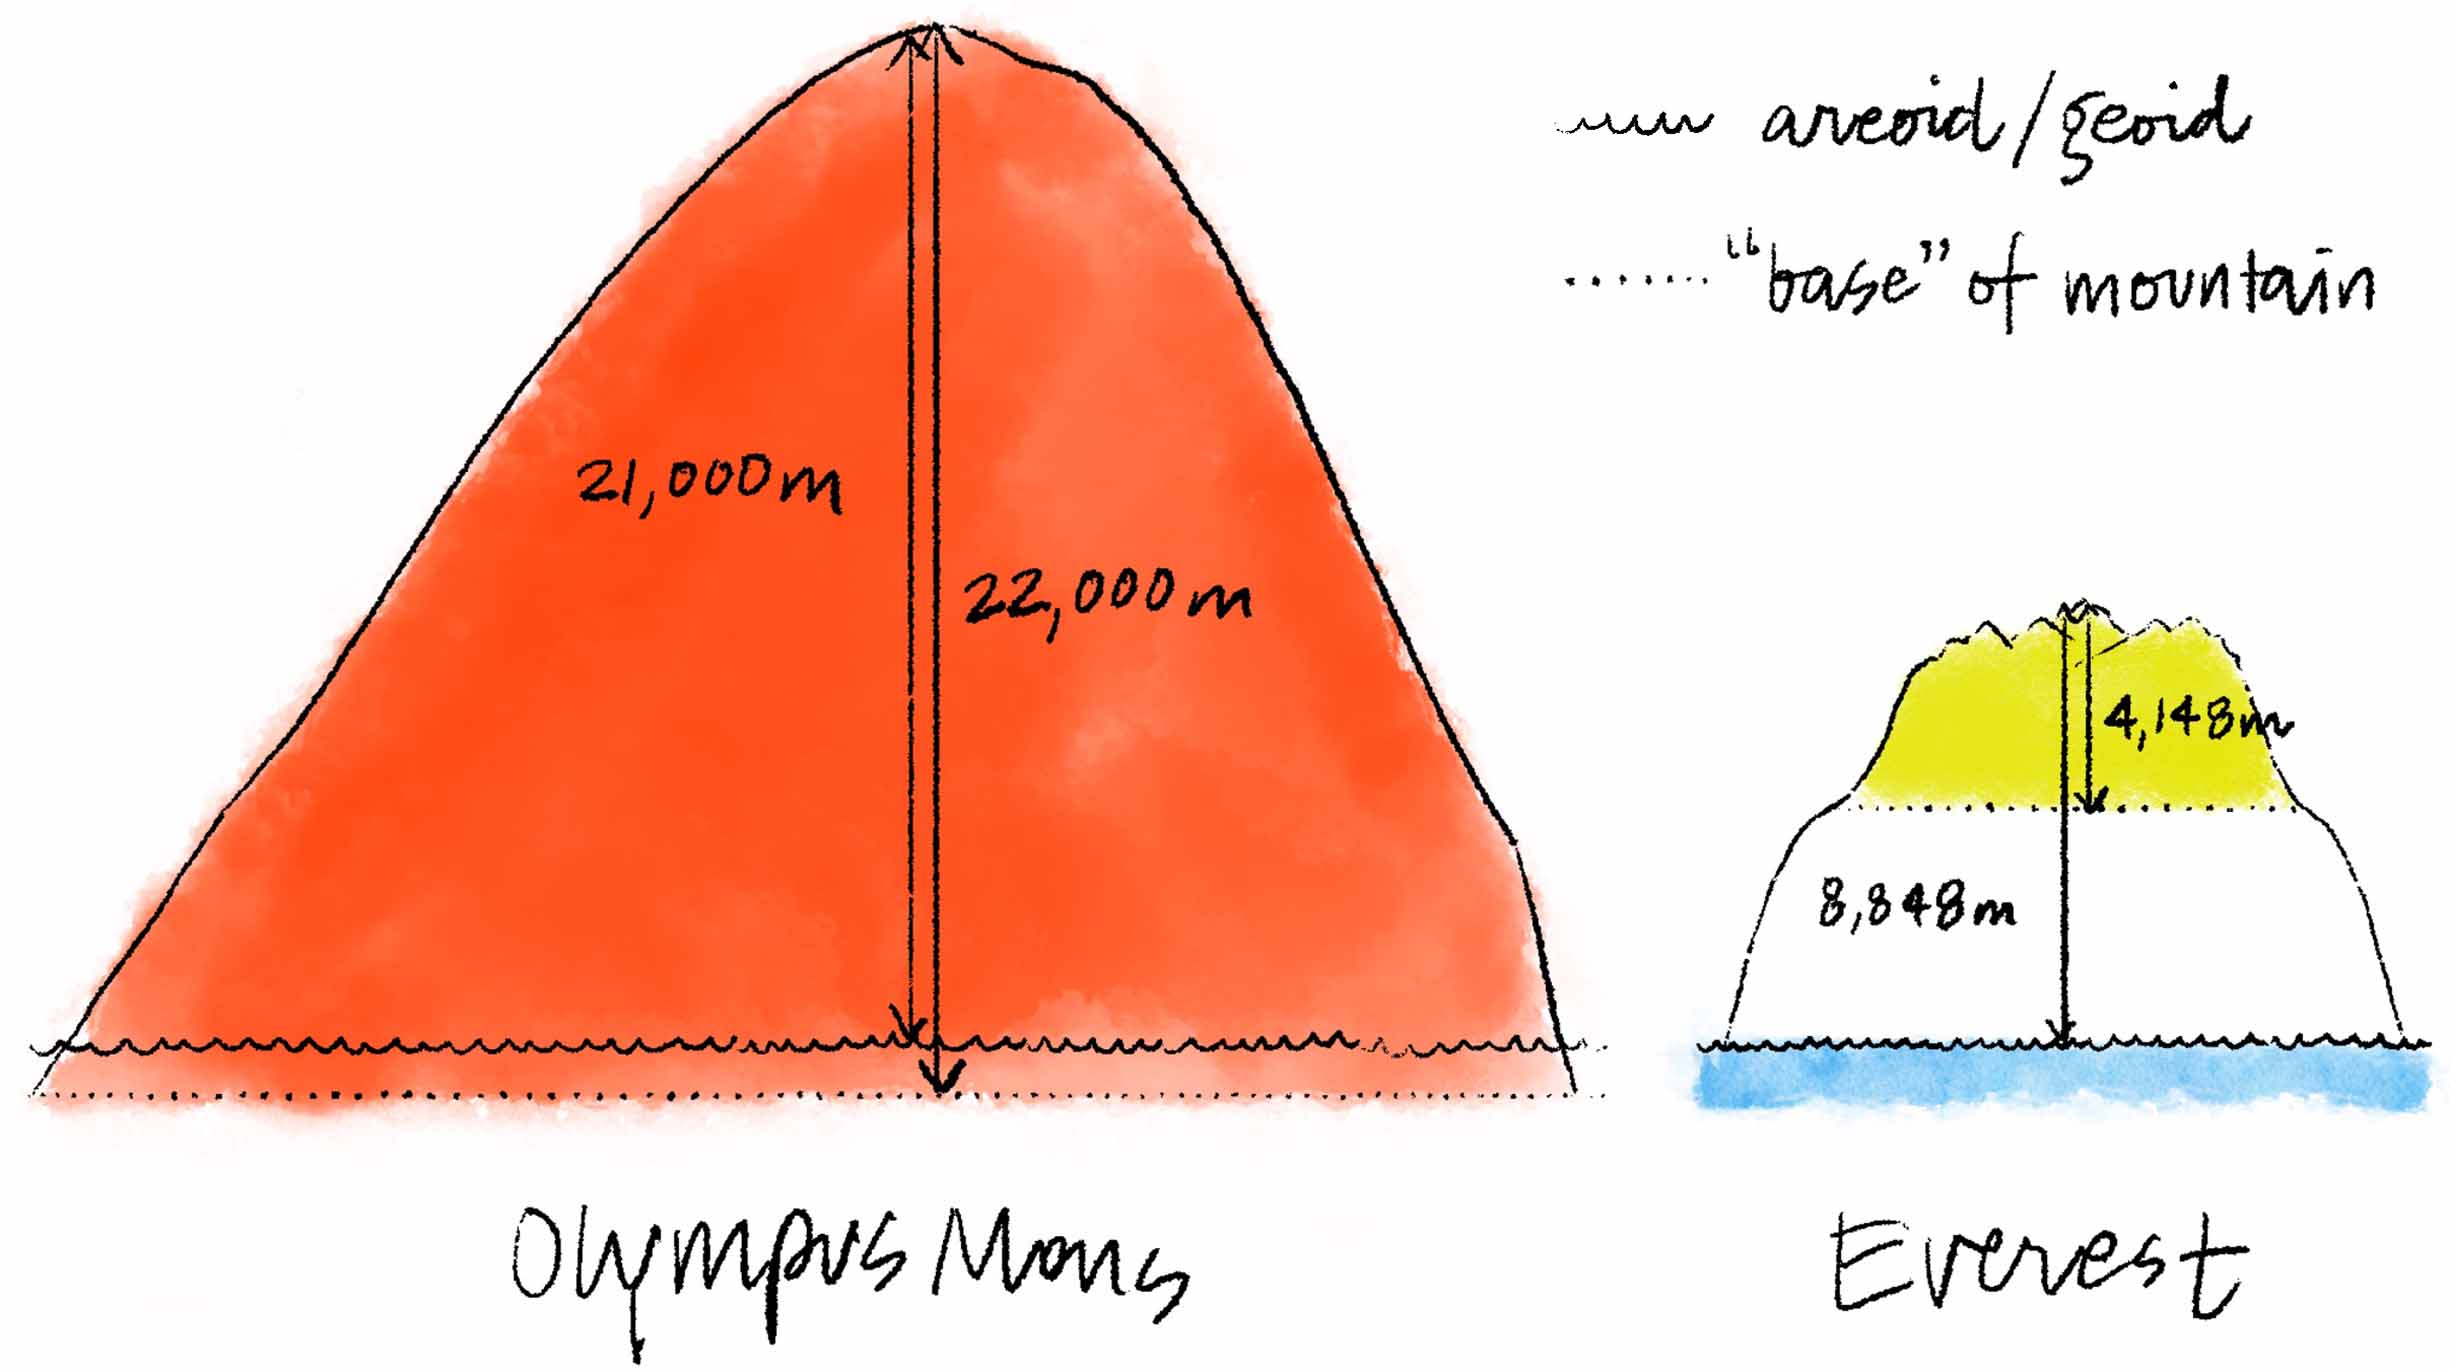 Olympus Mons and Everest side by side, with demarcations of their areoid and geoid respectively, as well as their baselines. Olympus Mons' baseline is below its areoid, while the reverse is shown of Everest.